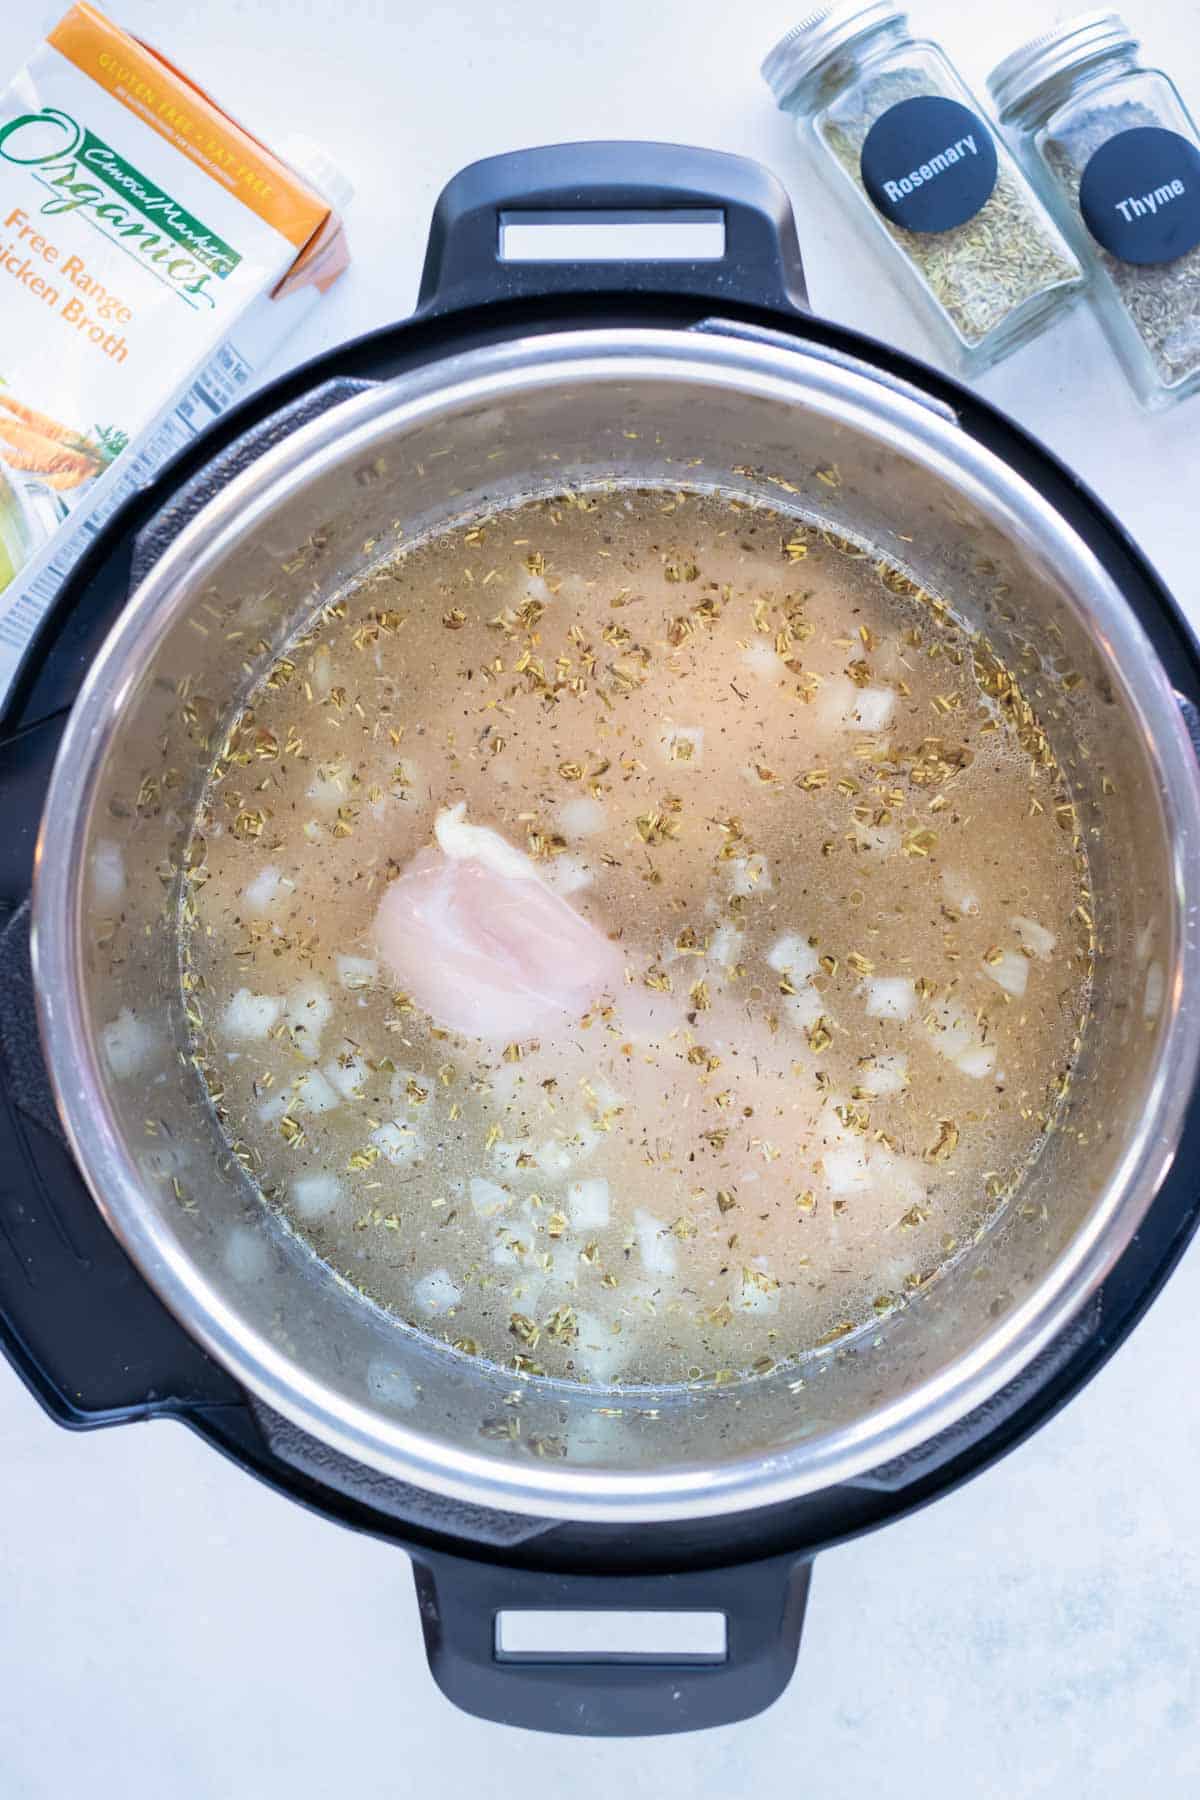 Broth, sautéed vegetables, and chicken breast are cooked in the instant pot.